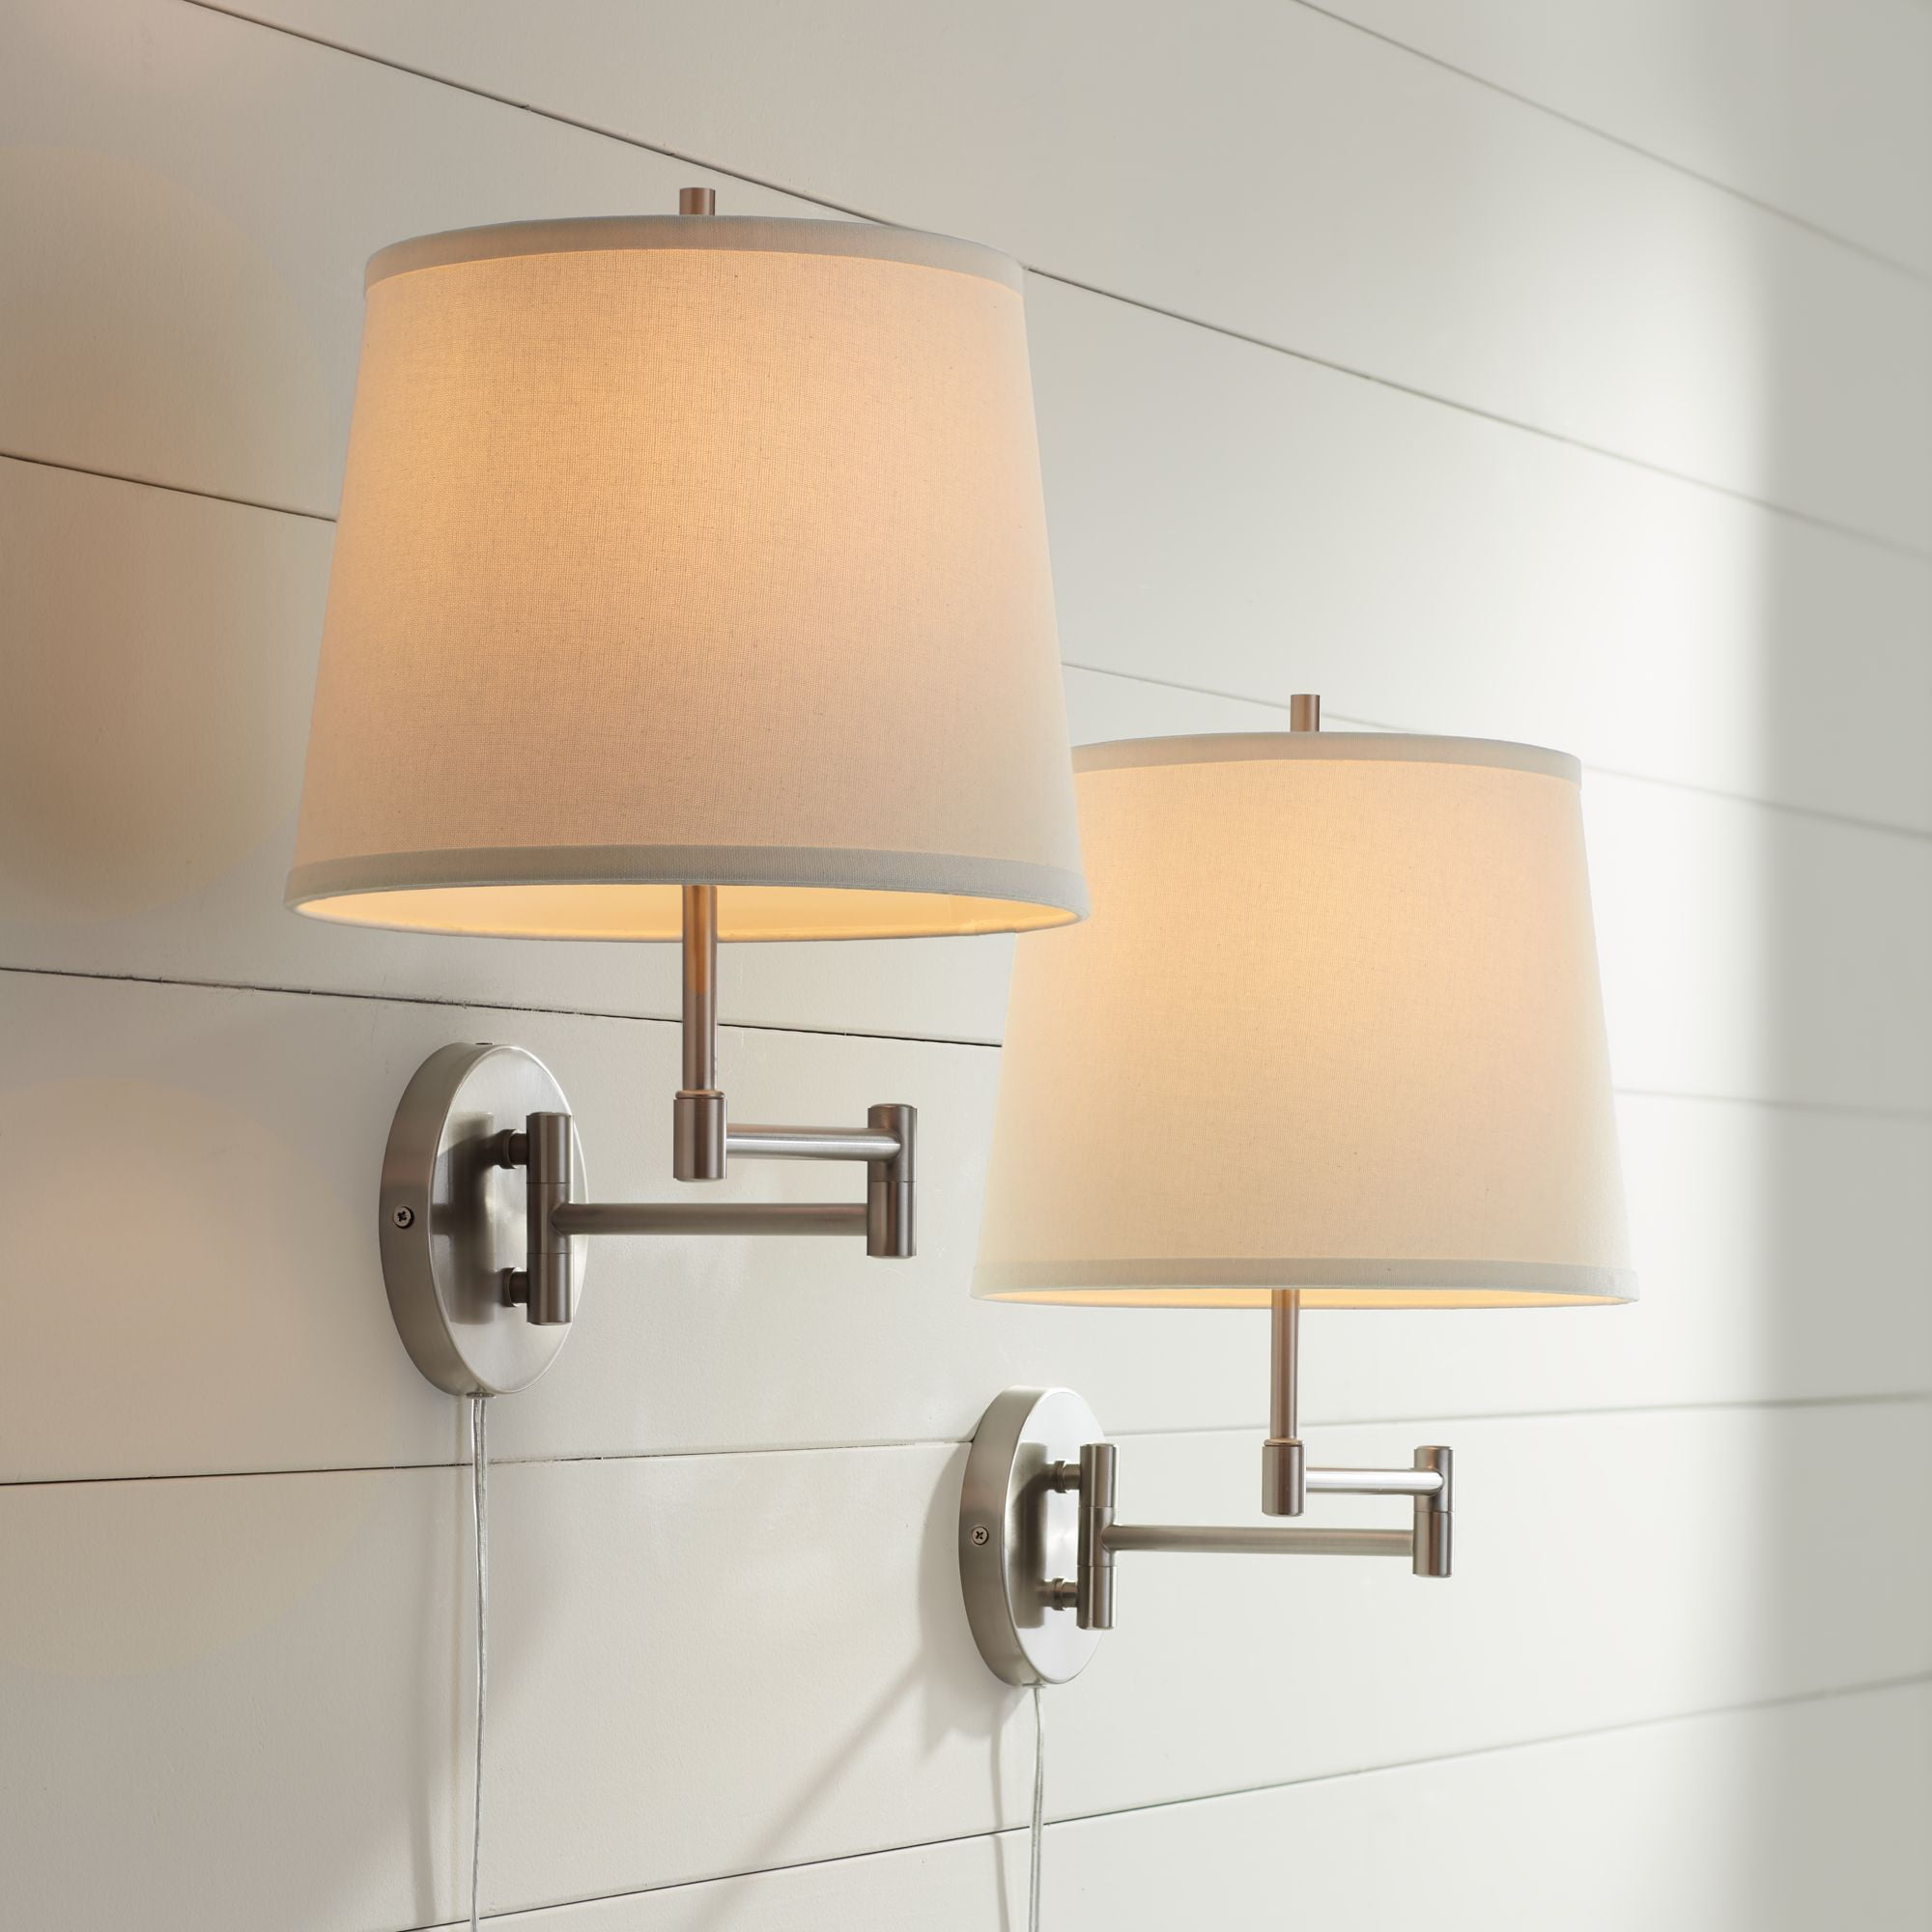 360 Lighting Modern Swing Arm Wall, Contemporary Bedroom Wall Lamps Plug In